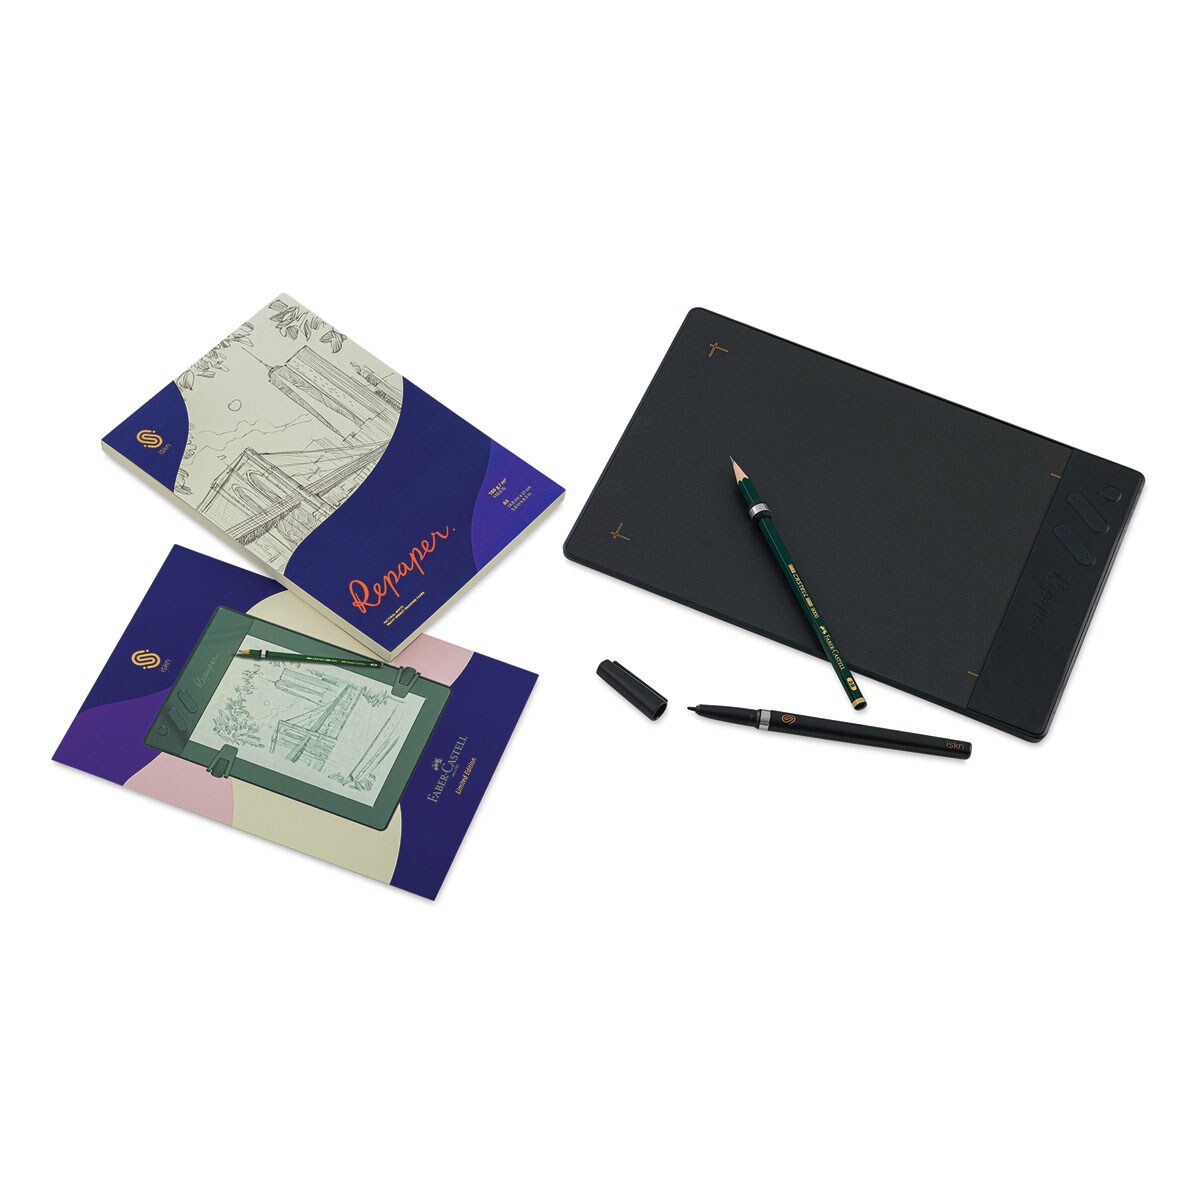 Iskn Repaper Graphic Tablet Faber-Castell Limited Edition - Black